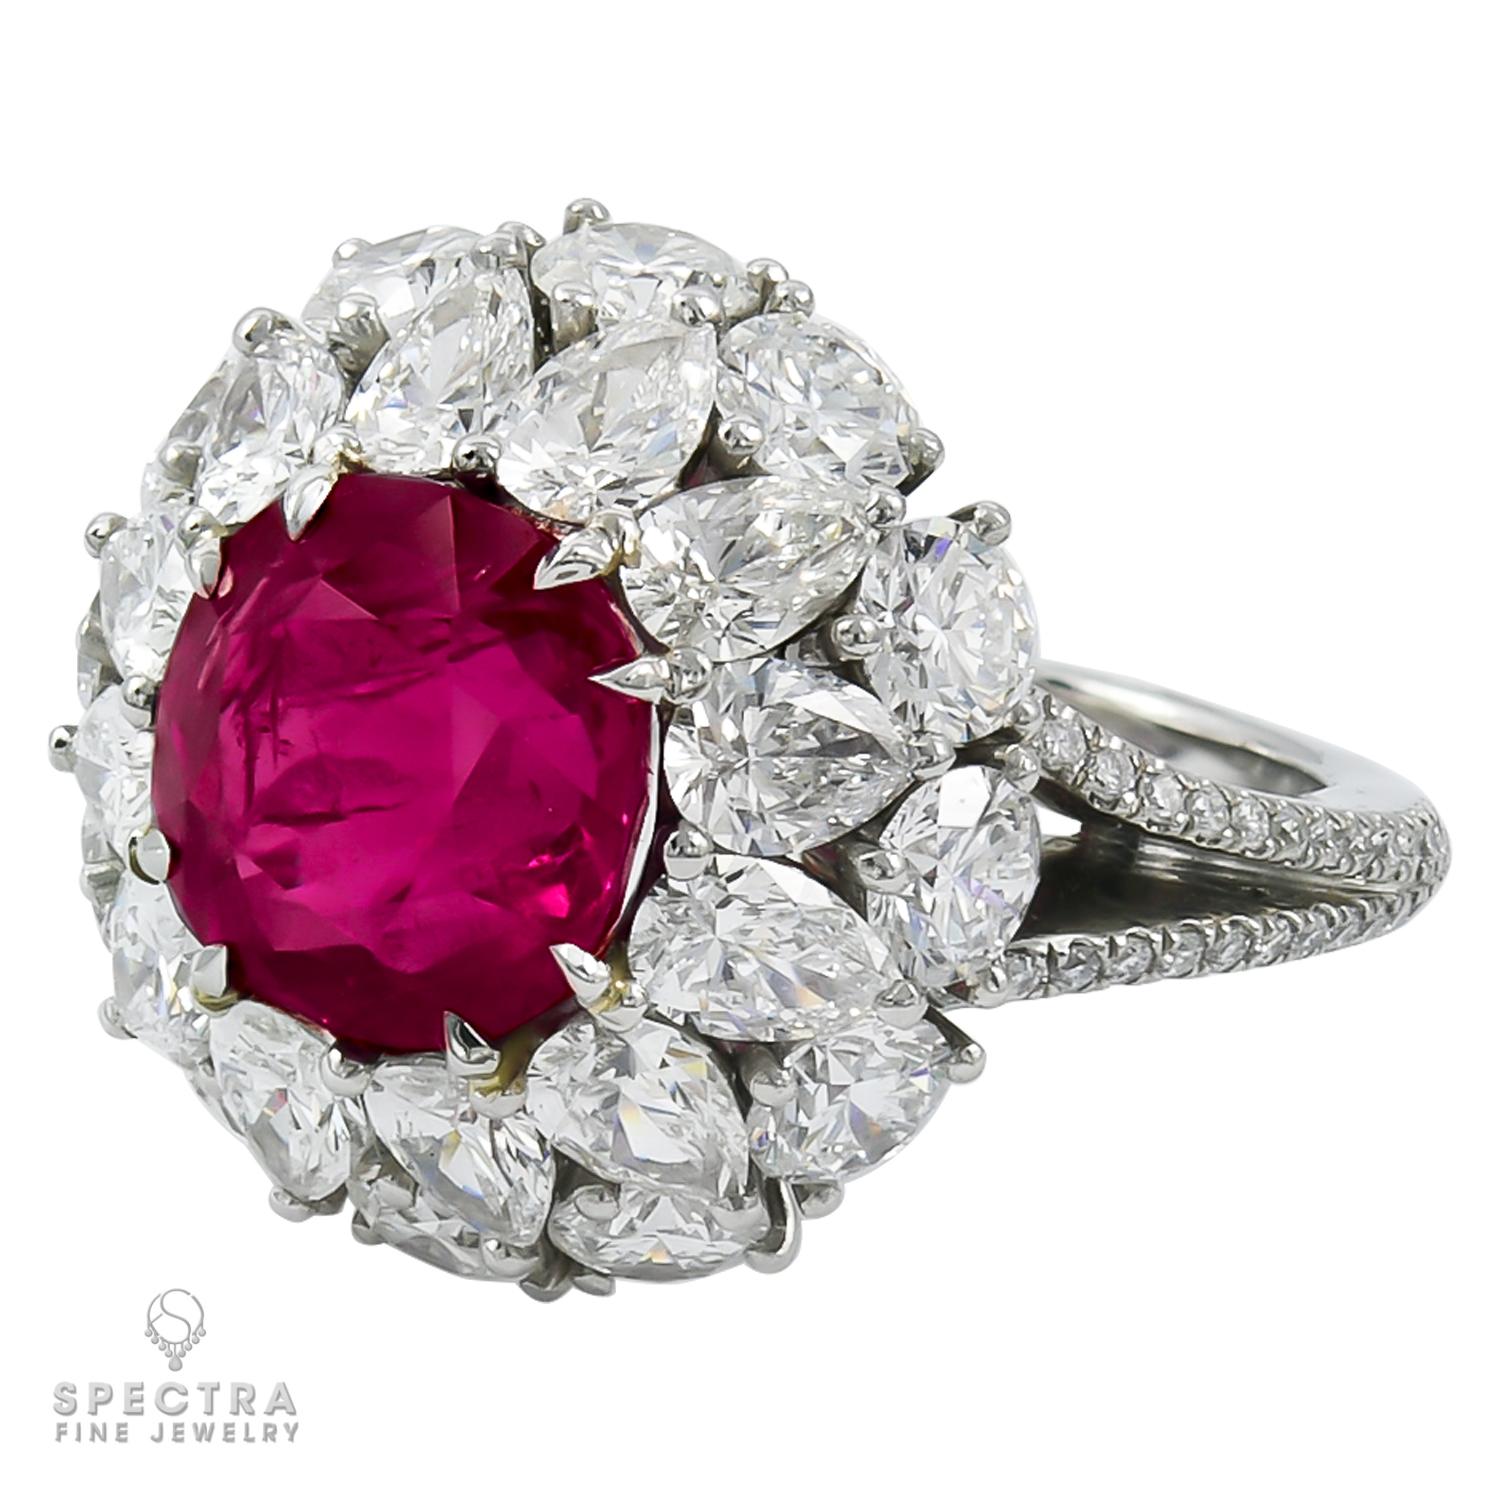 Cushion Cut Spectra Fine Jewelry 4.99 Carat Ruby Diamond Cocktail Ring For Sale